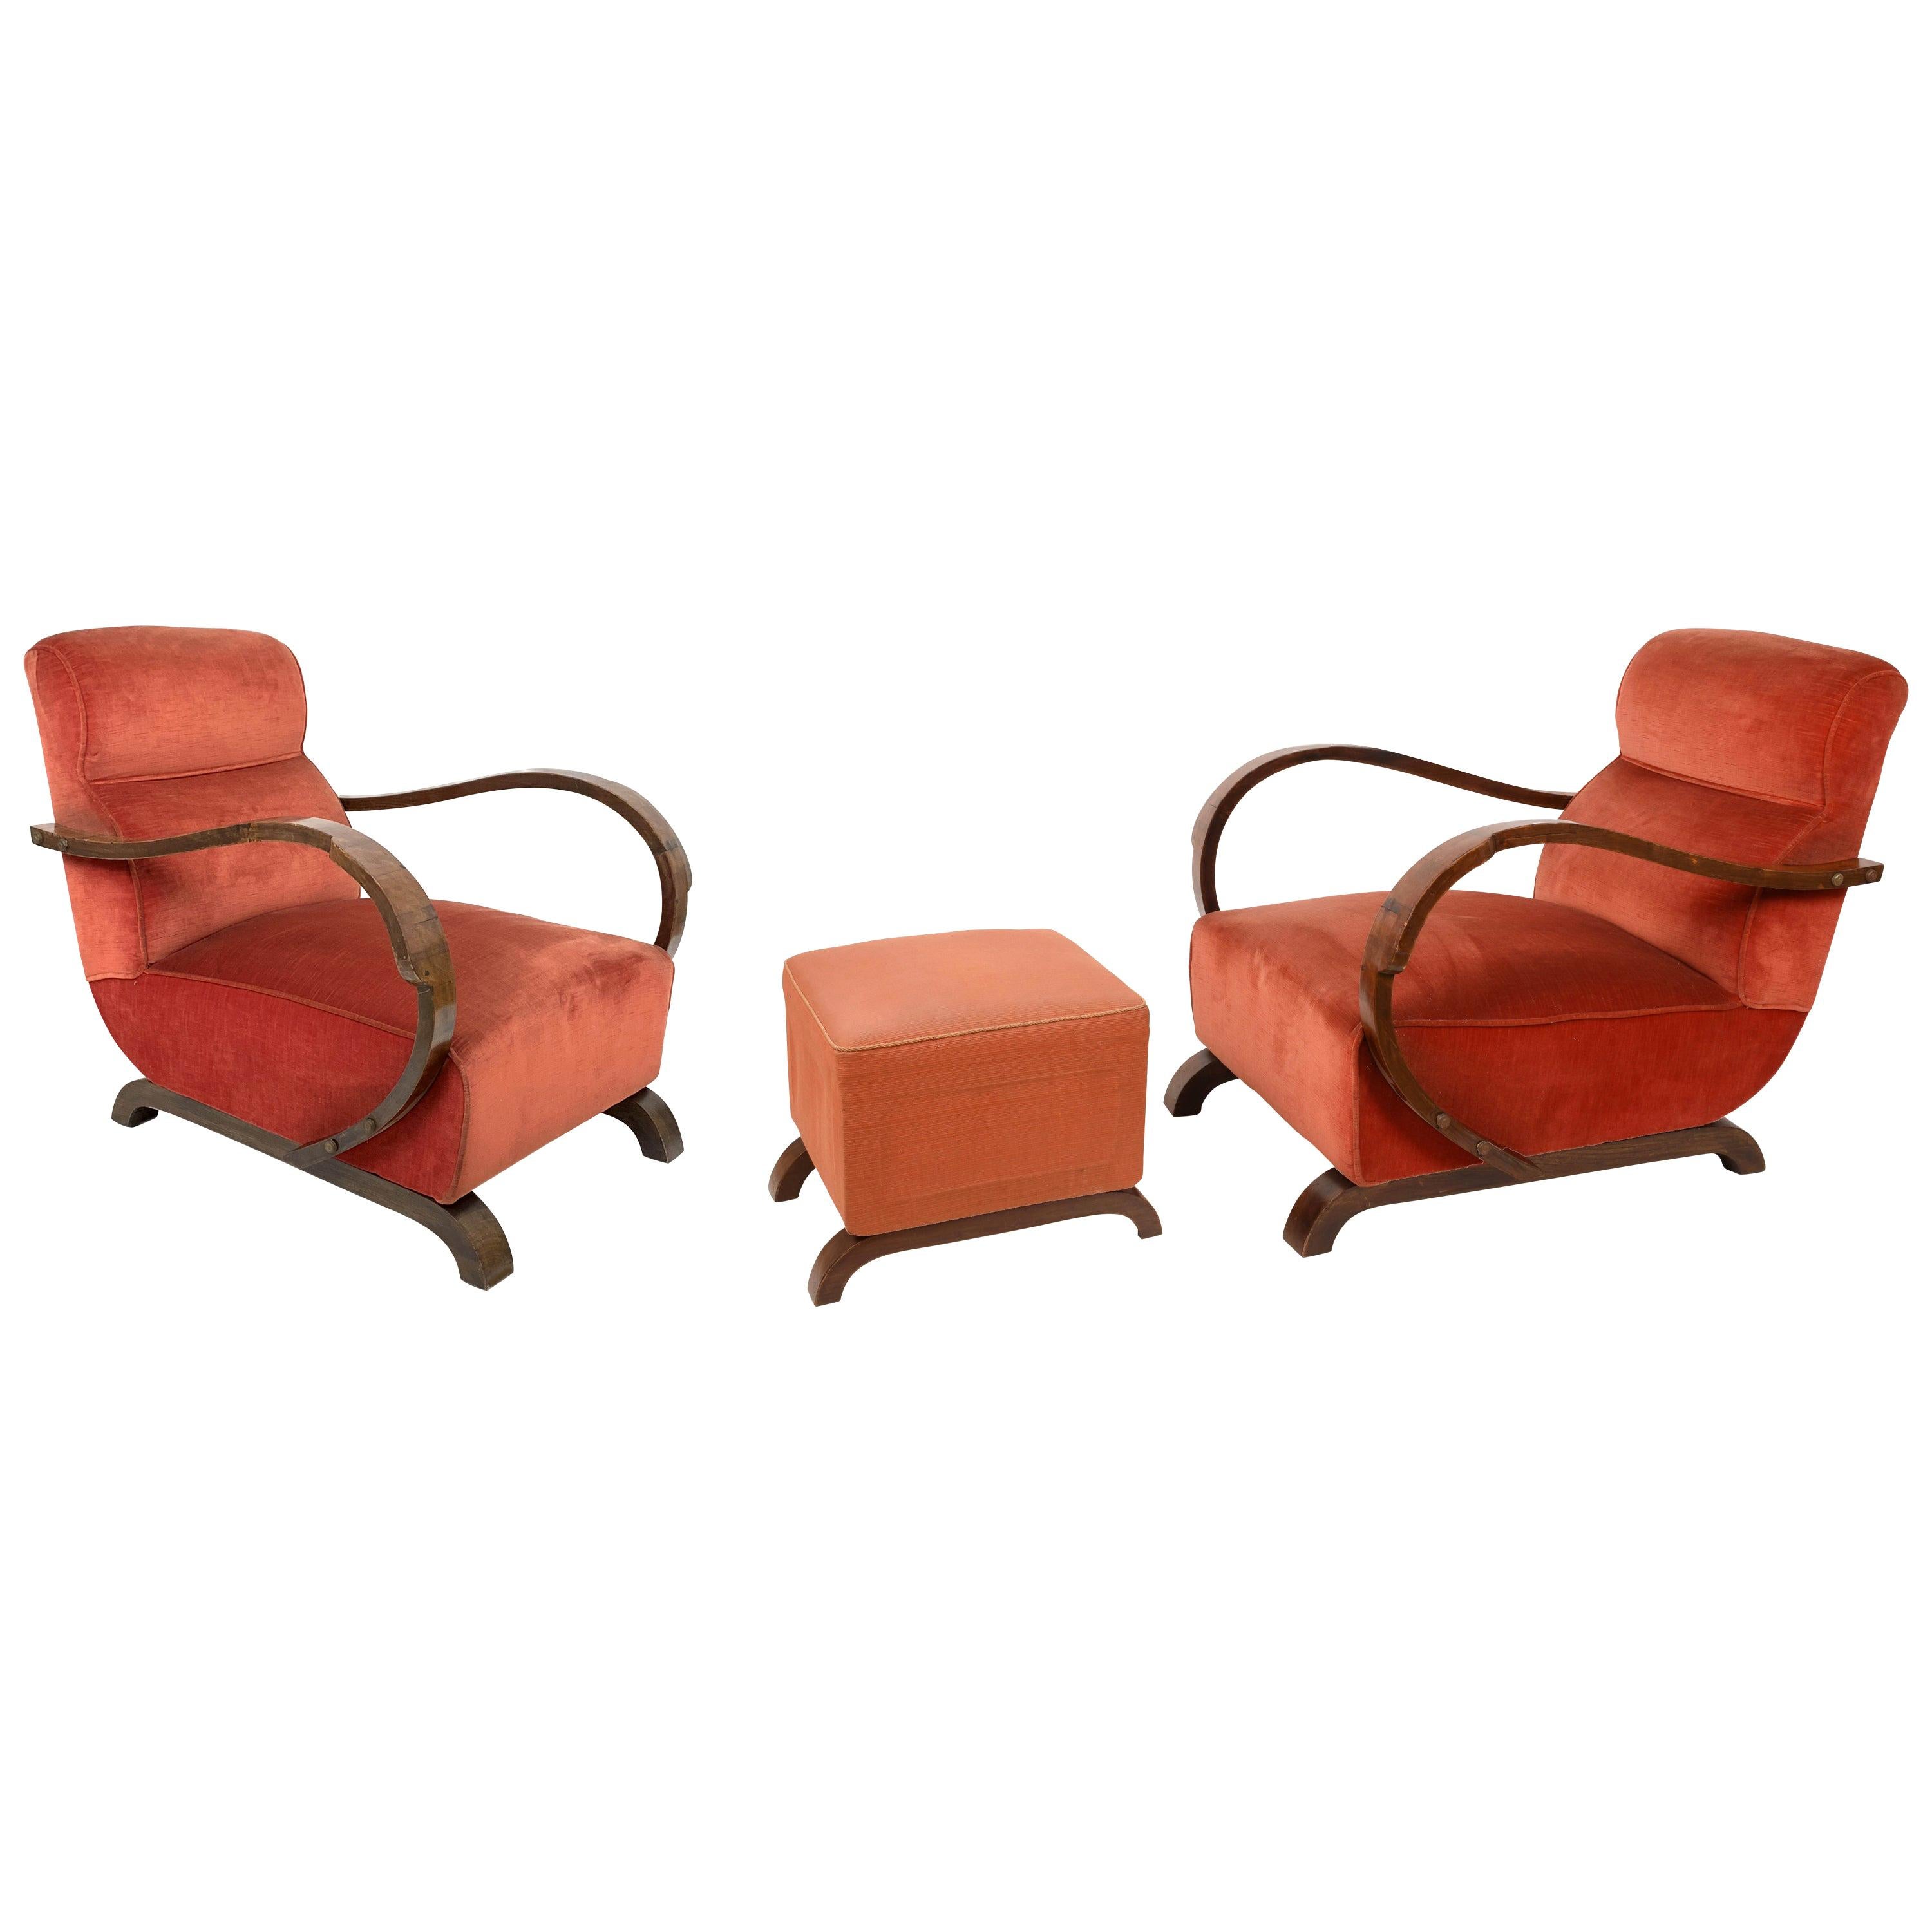 Pair of Art Deco Walnut and Red Fabric Italian Armchairs and Ottoman, 1930s